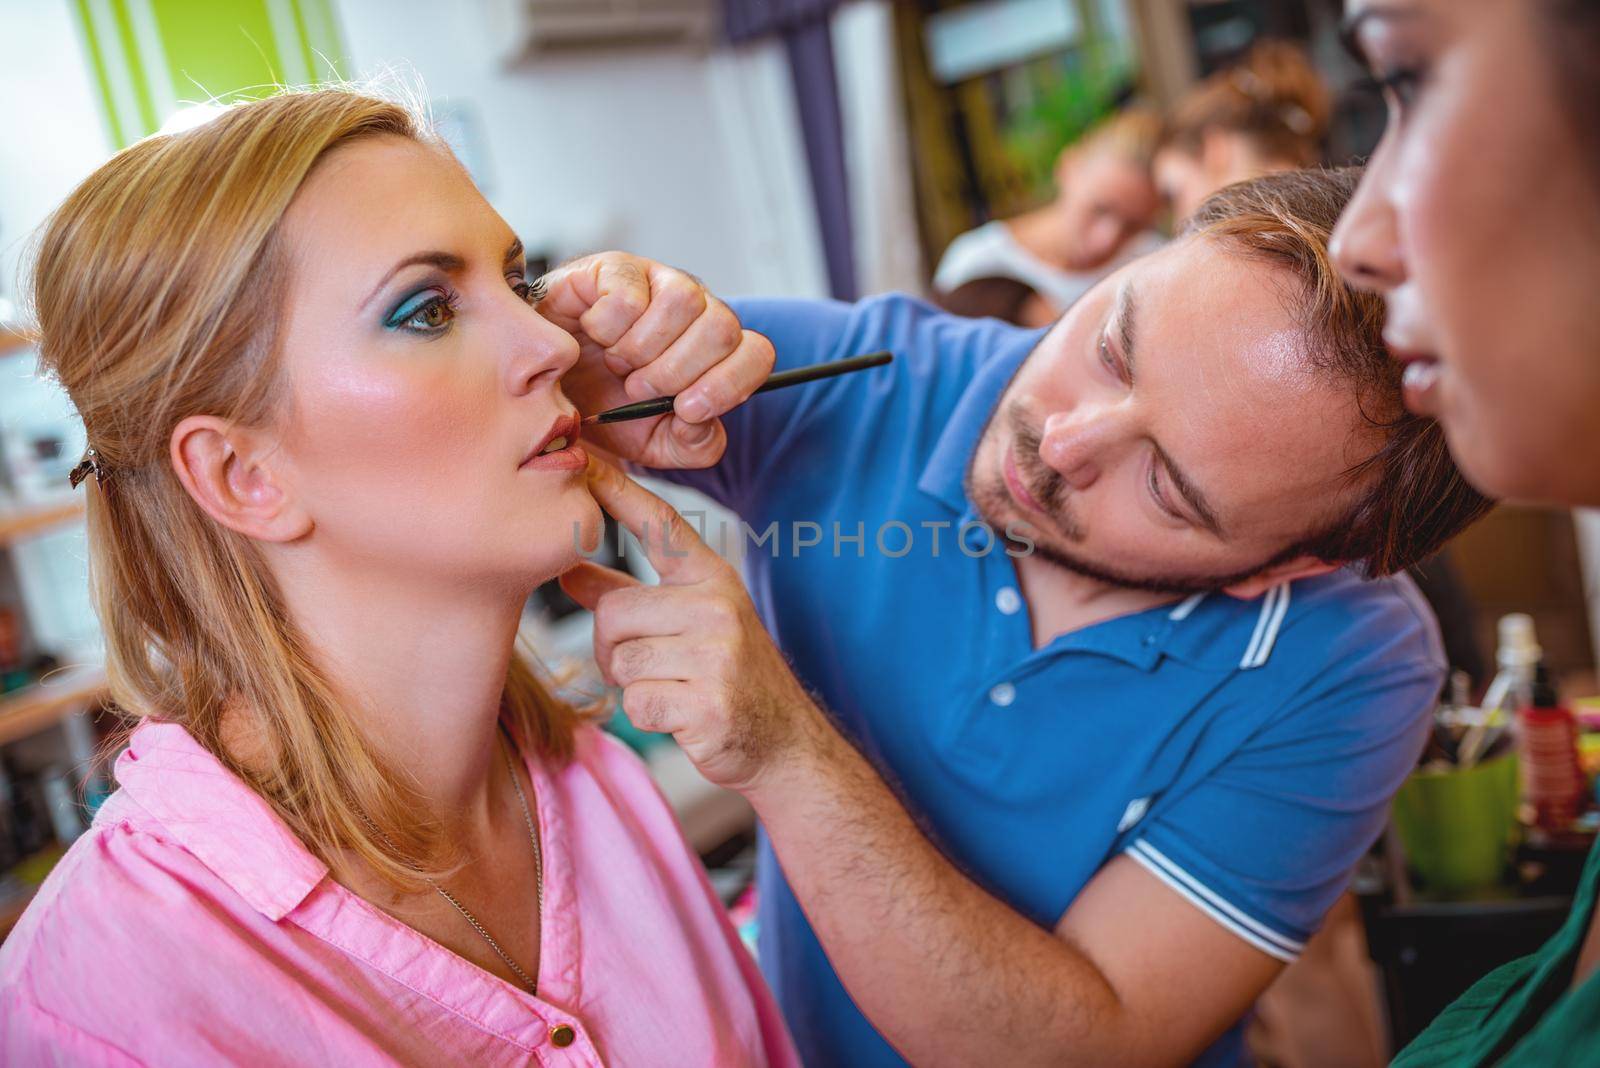 Makeup teacher is helping students training to become makeup artist.